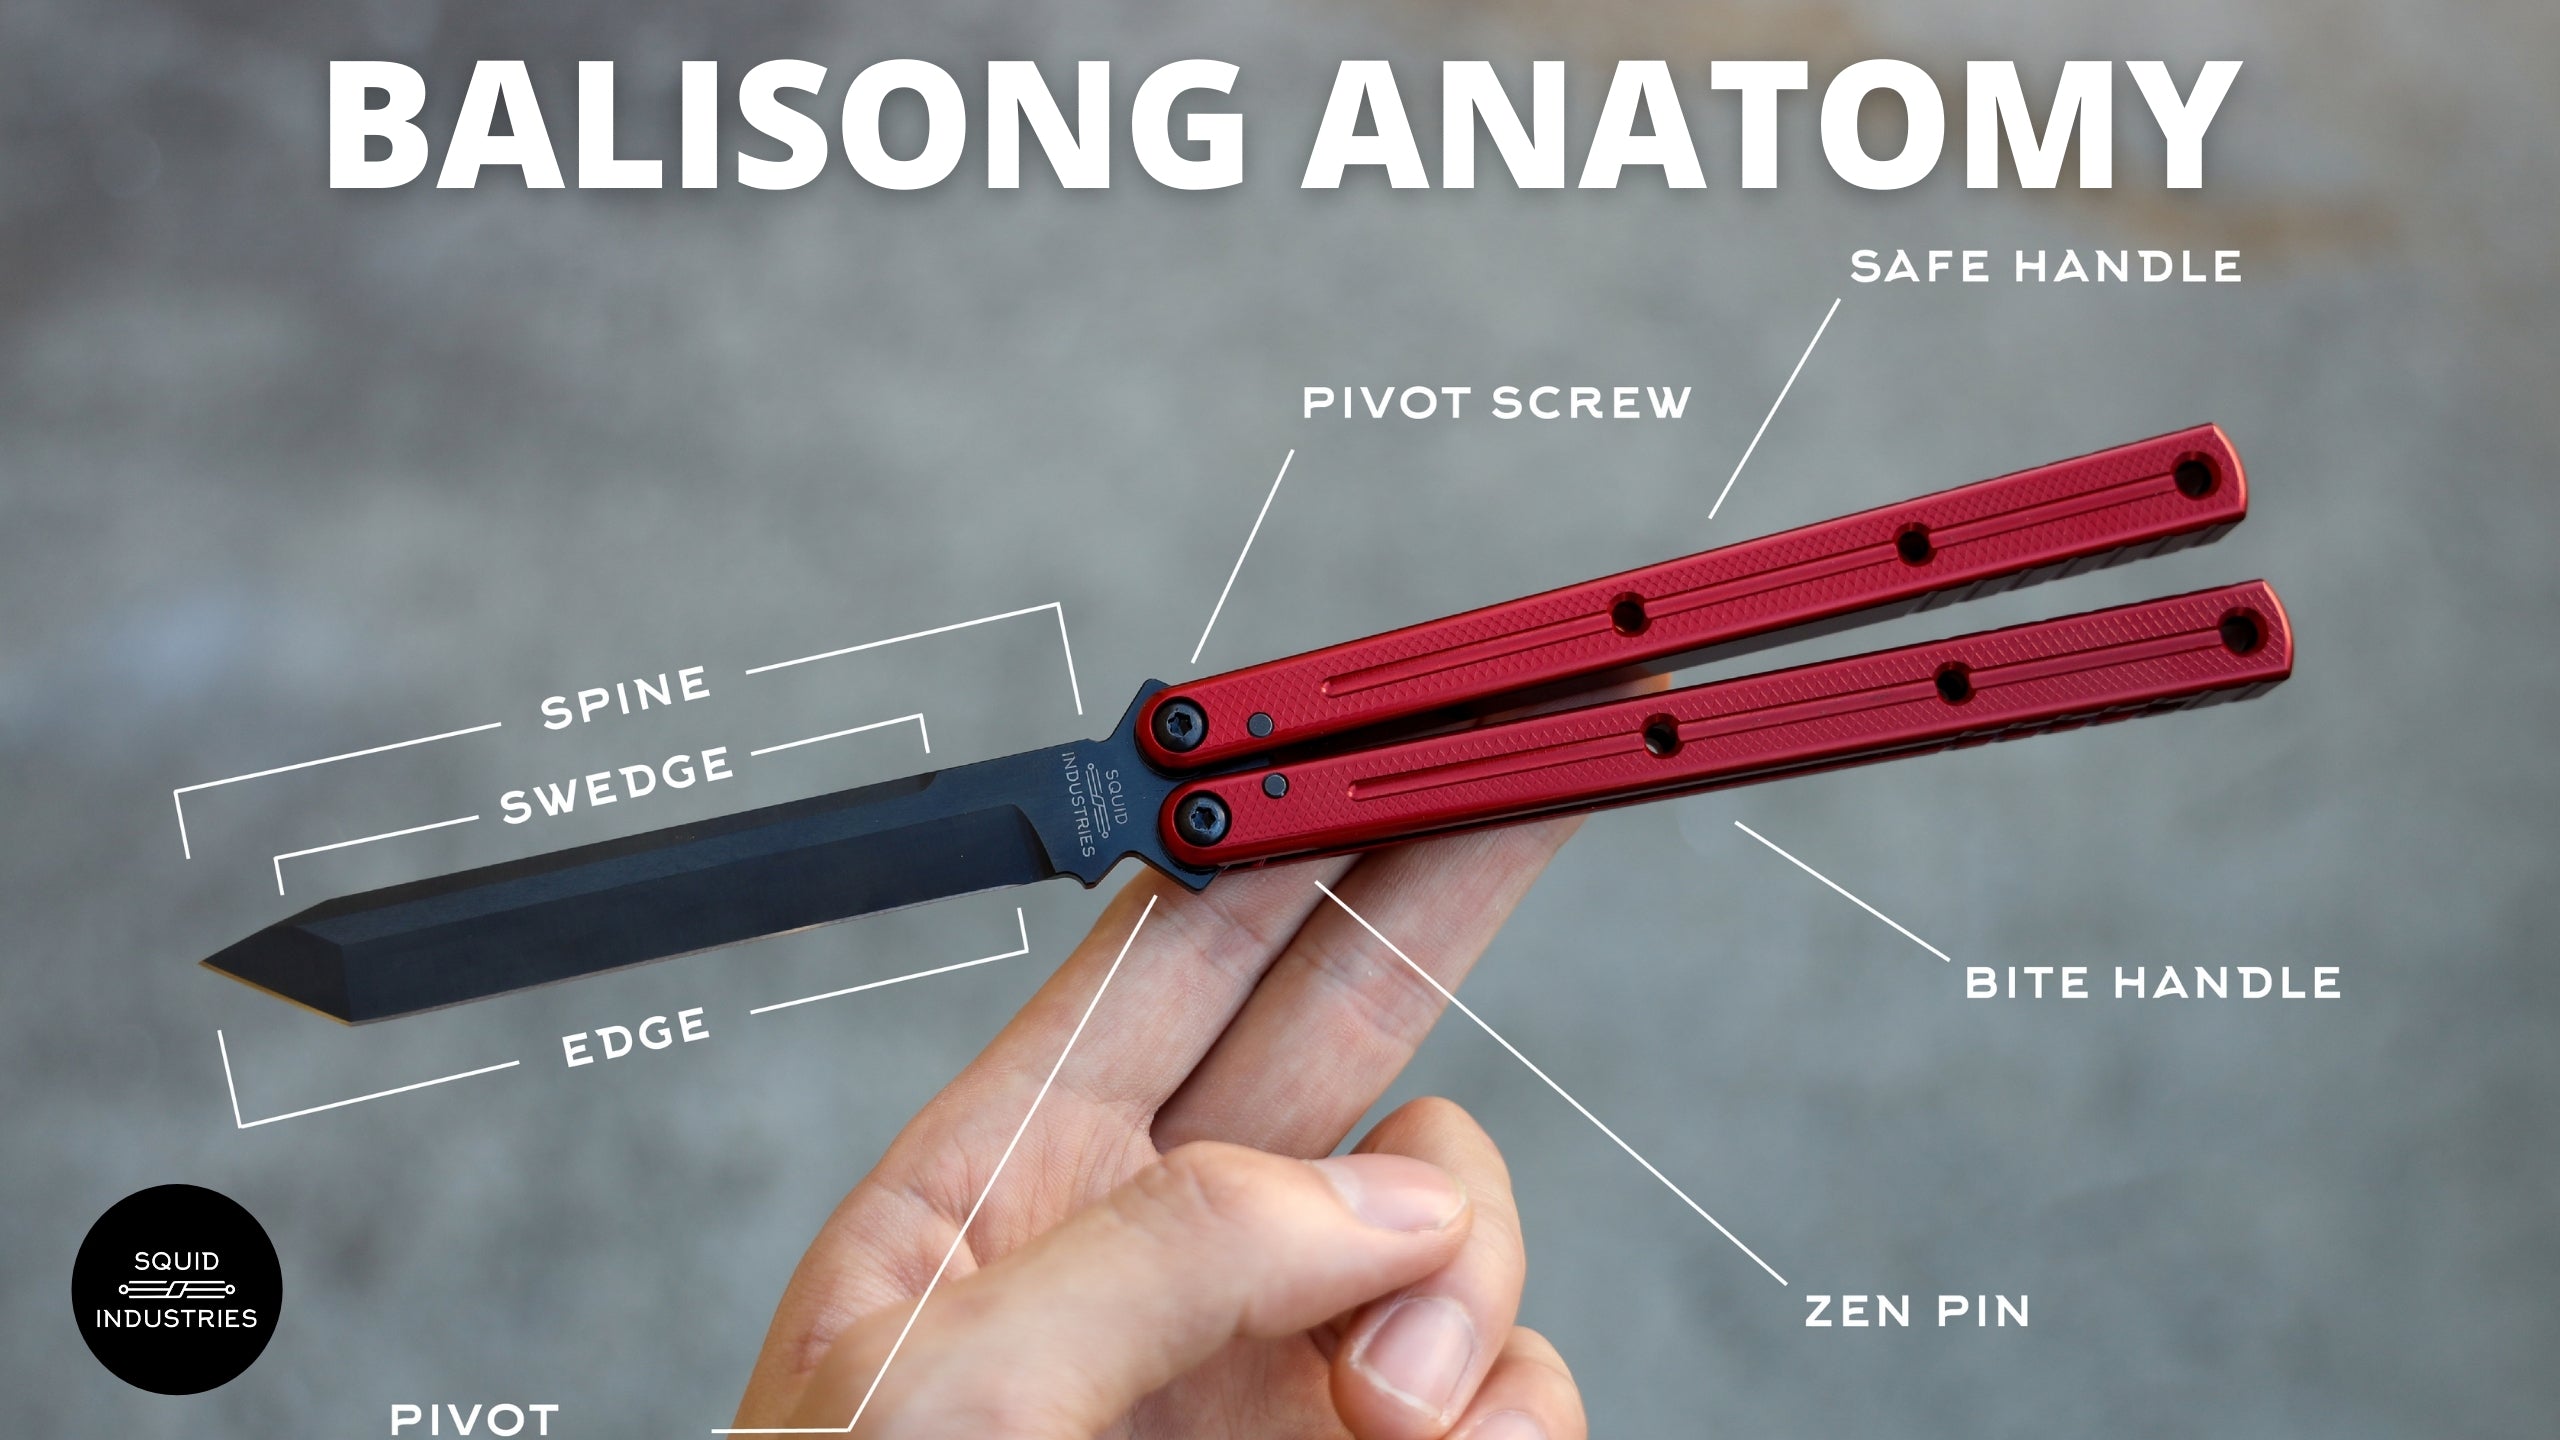 The balisong quick-start guide